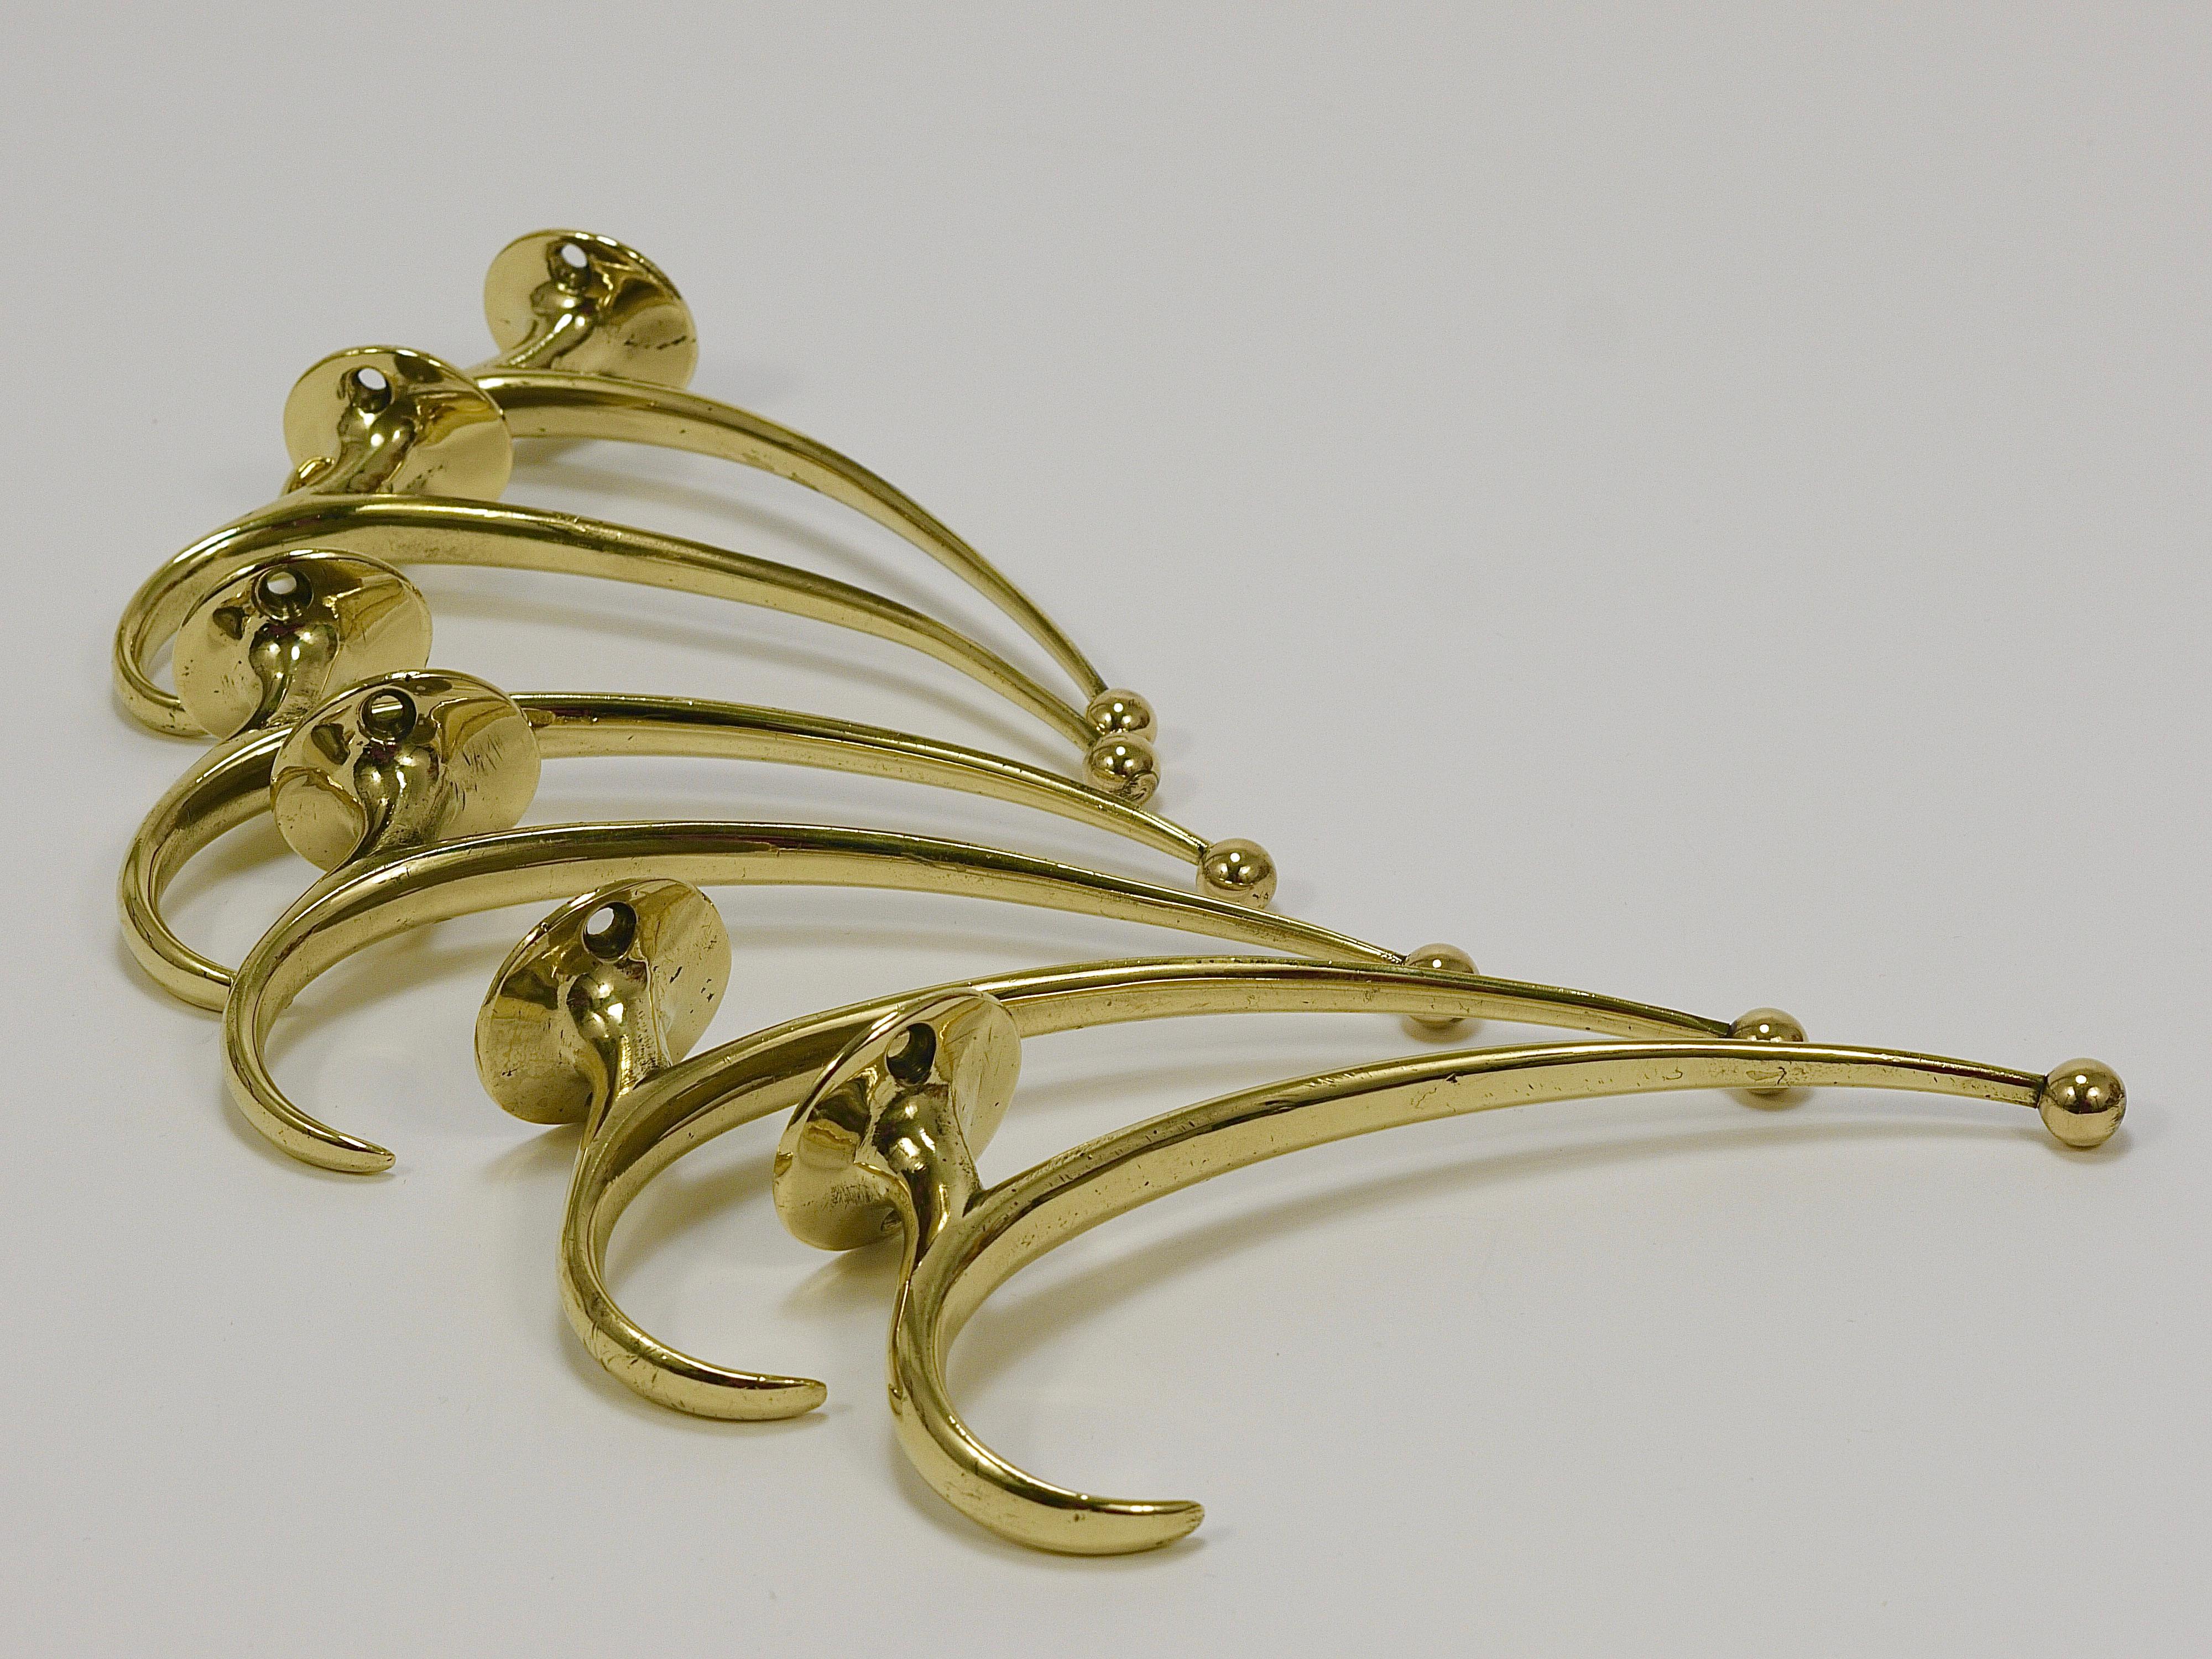 Six Franz Hagenauer Vienna Mid-Century Curved Brass Wall Coat Hooks, 1950s For Sale 6